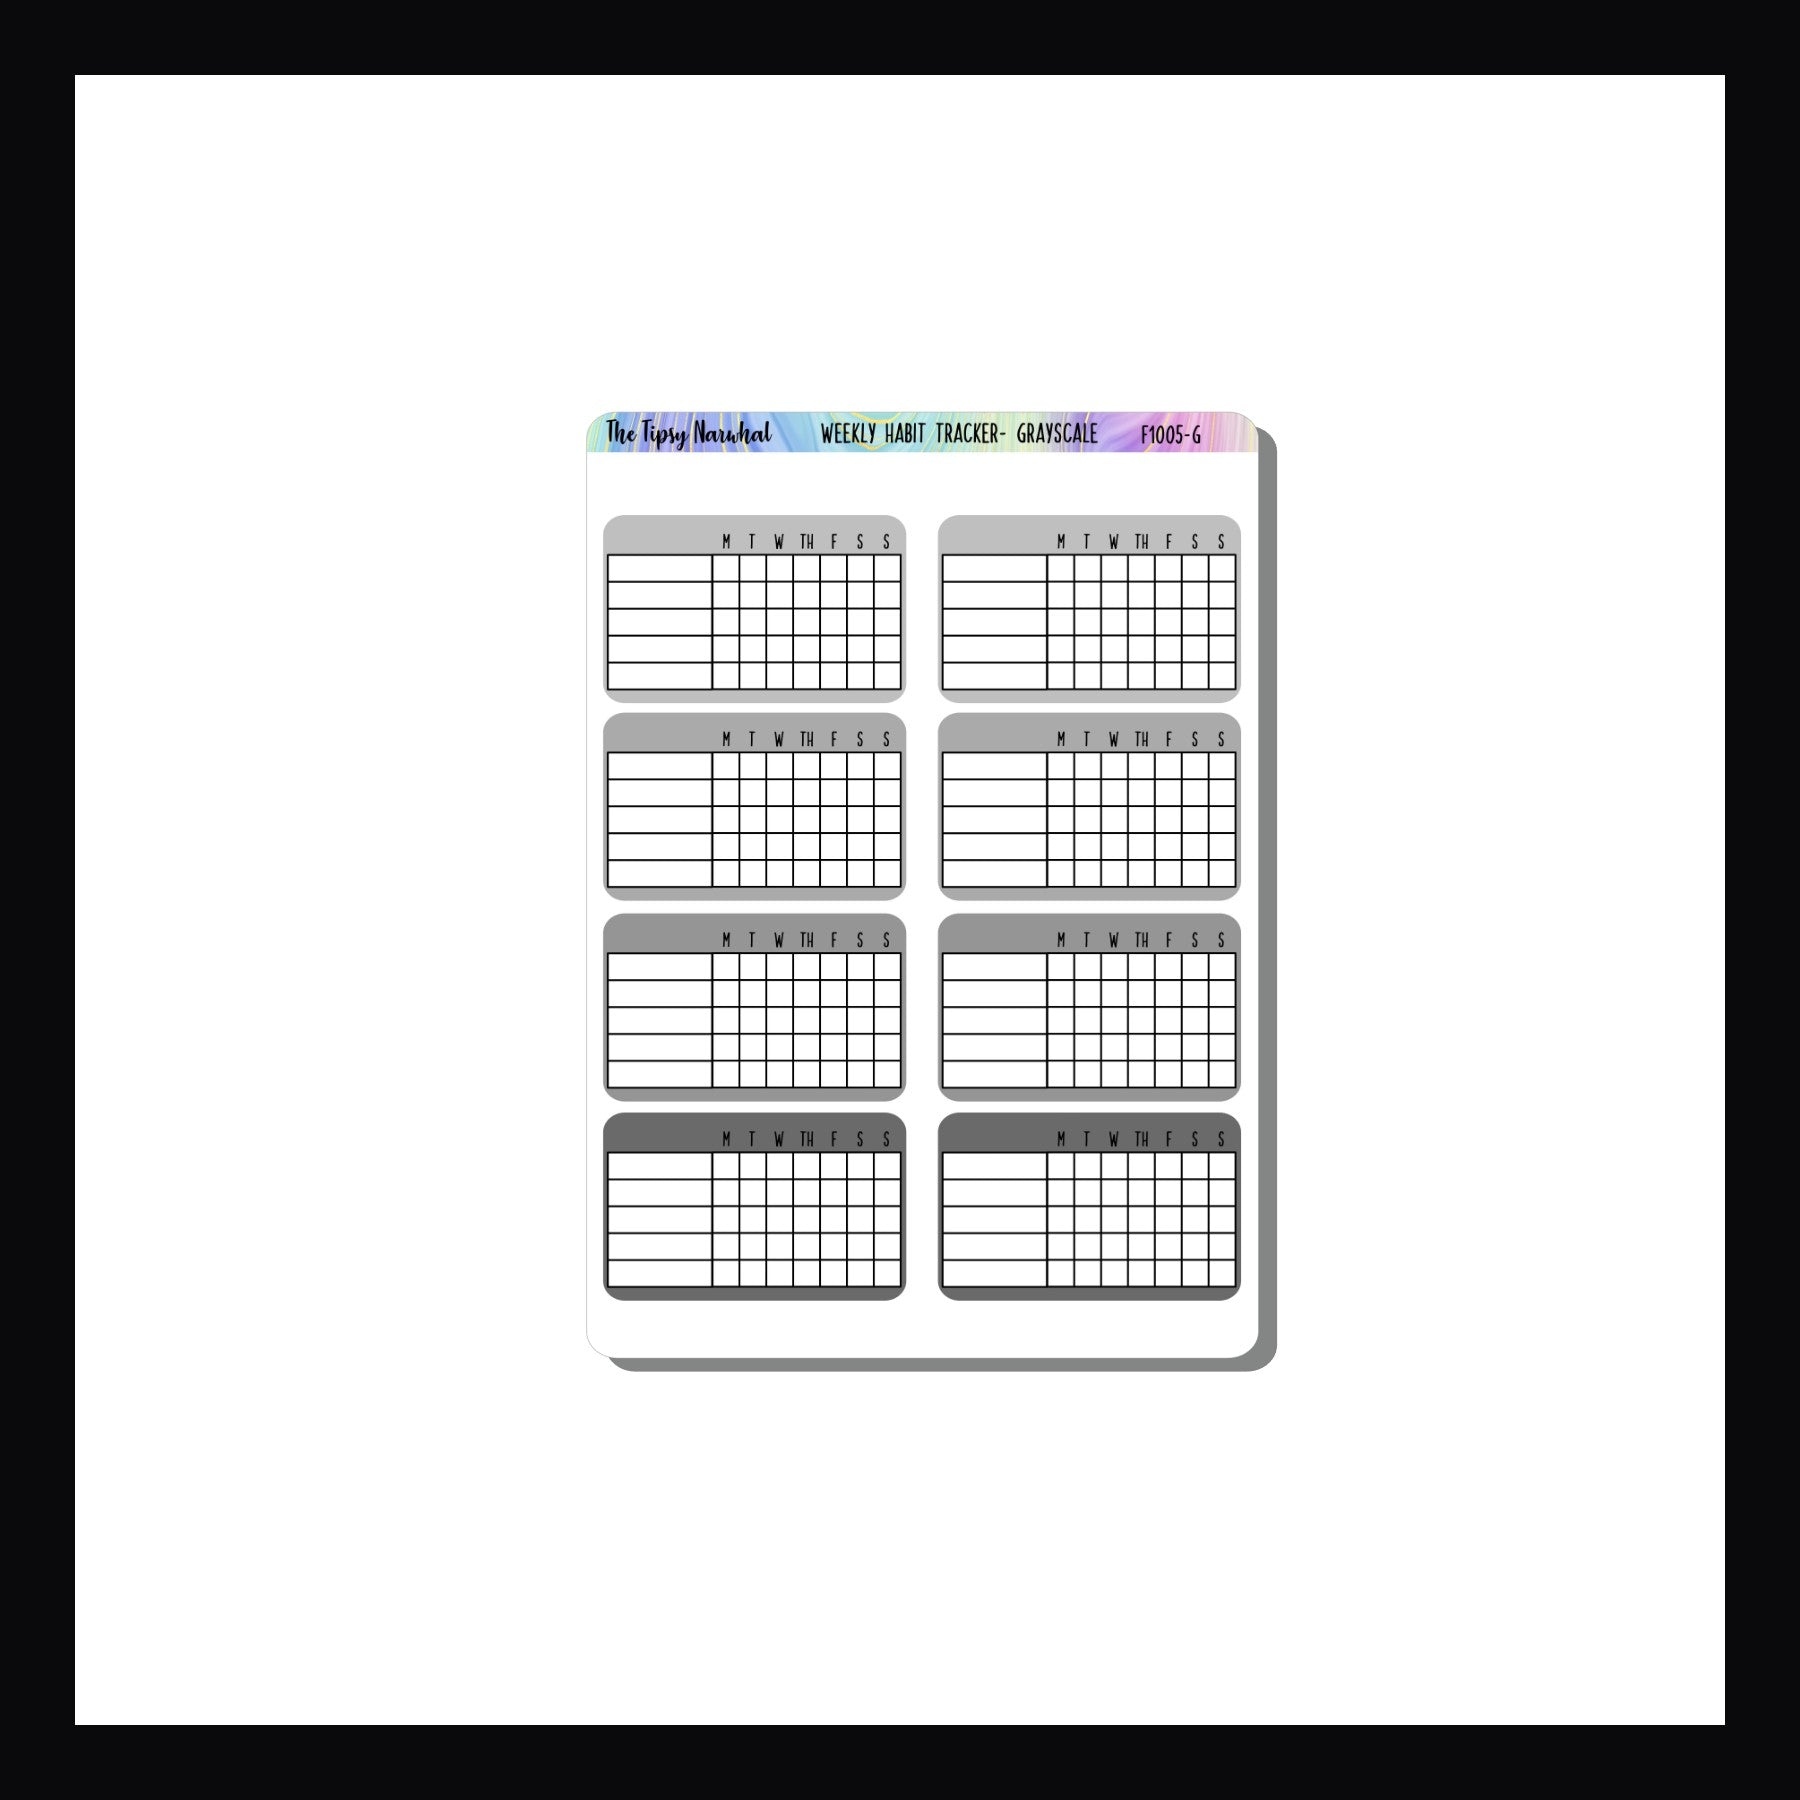 Grayscale habit tracking stickers.  8 stickers per sheet, 5 habits tracked over one week